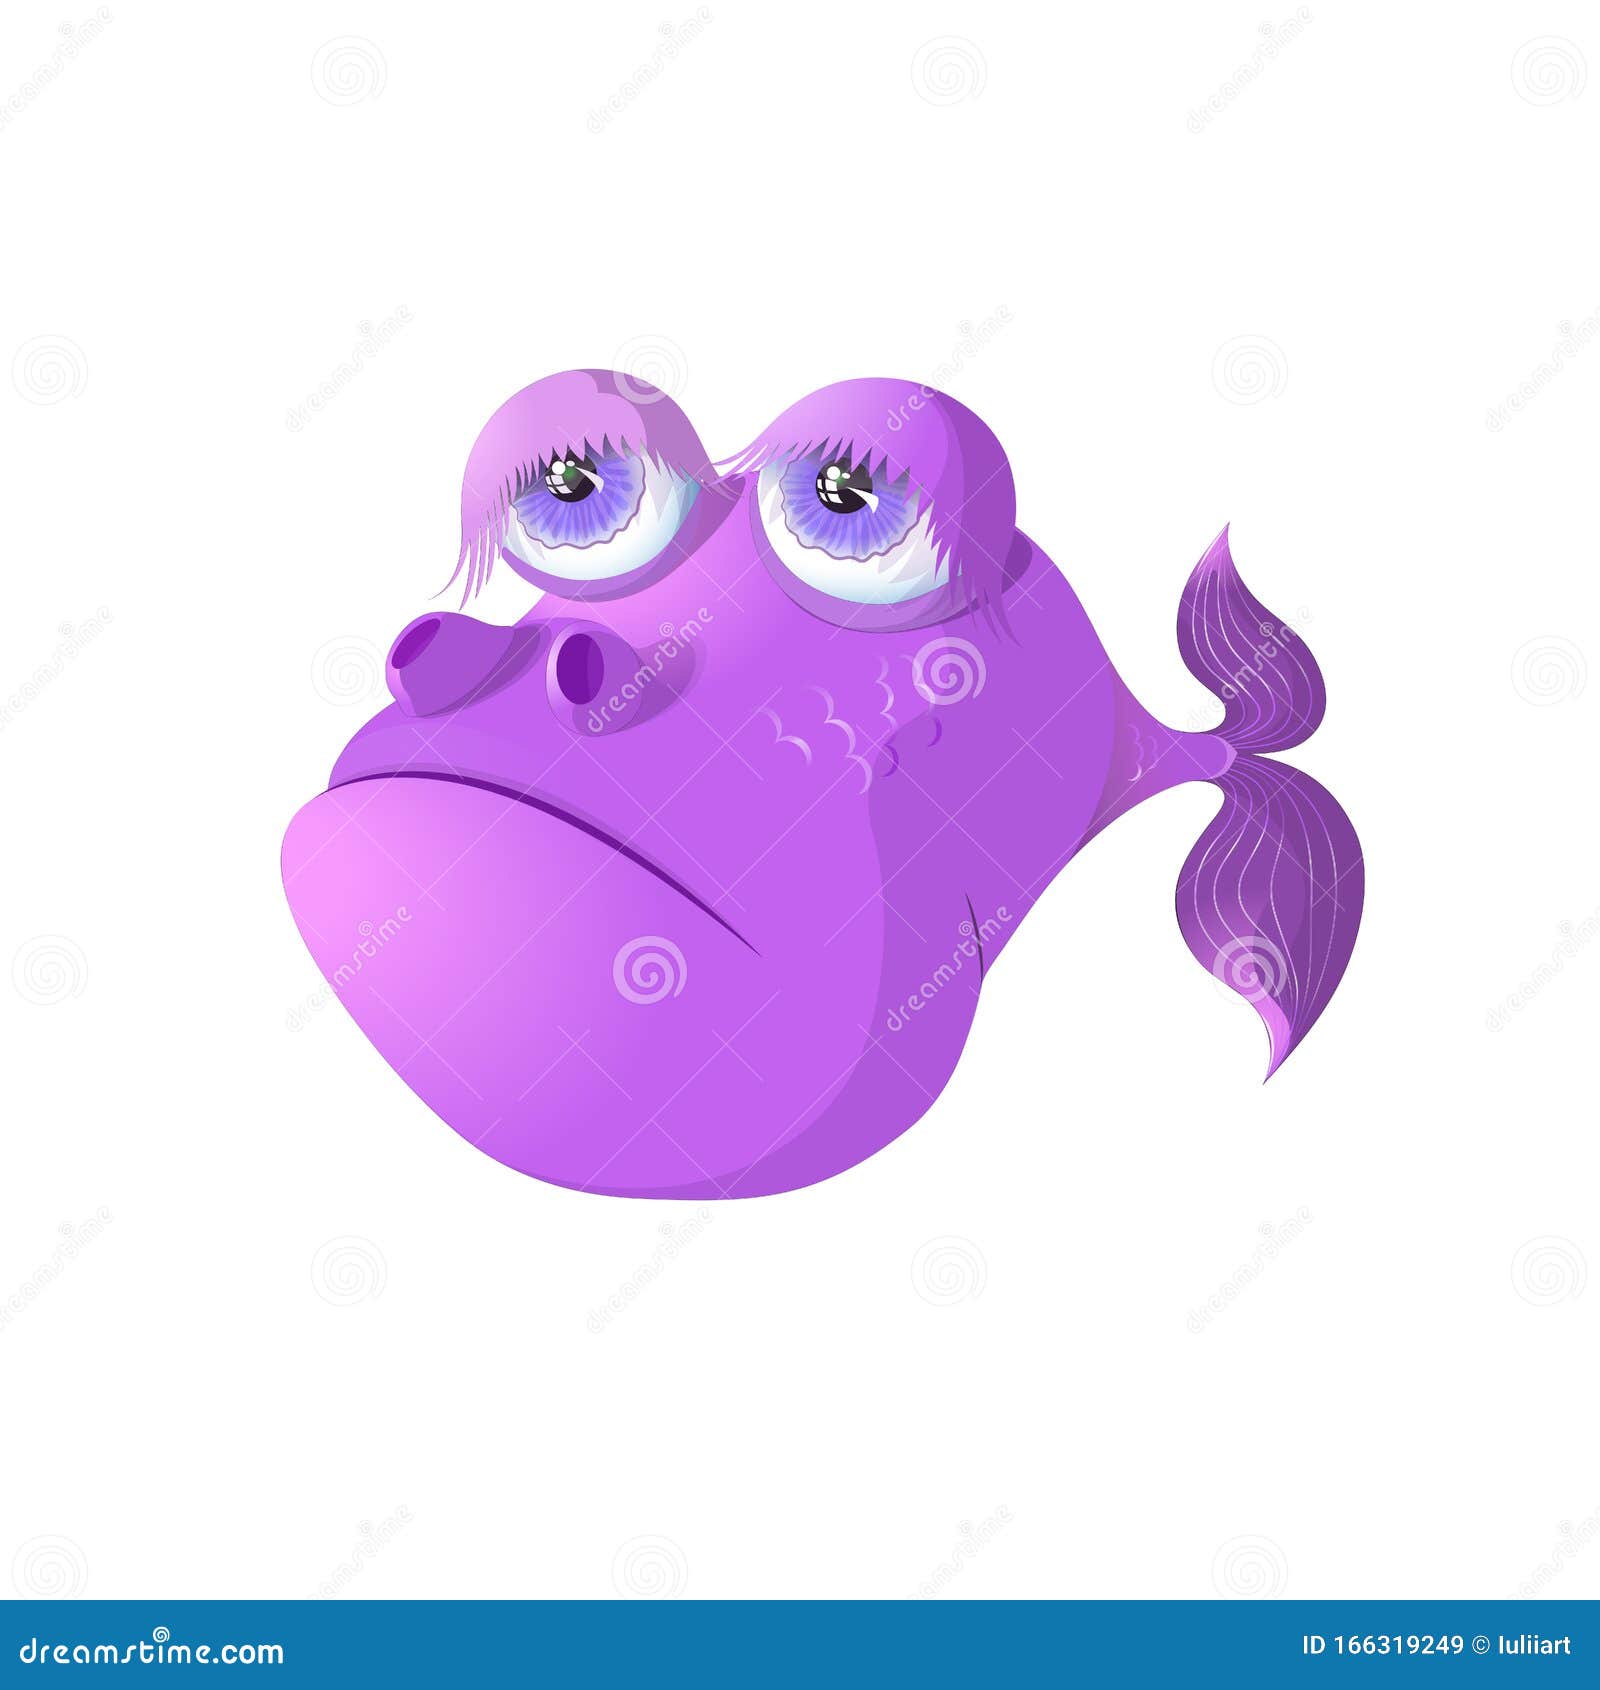 Vector Sad Cartoon Alien Pink Fish Character Isolated on White Background  Stock Vector - Illustration of fantasy, fiction: 166319249